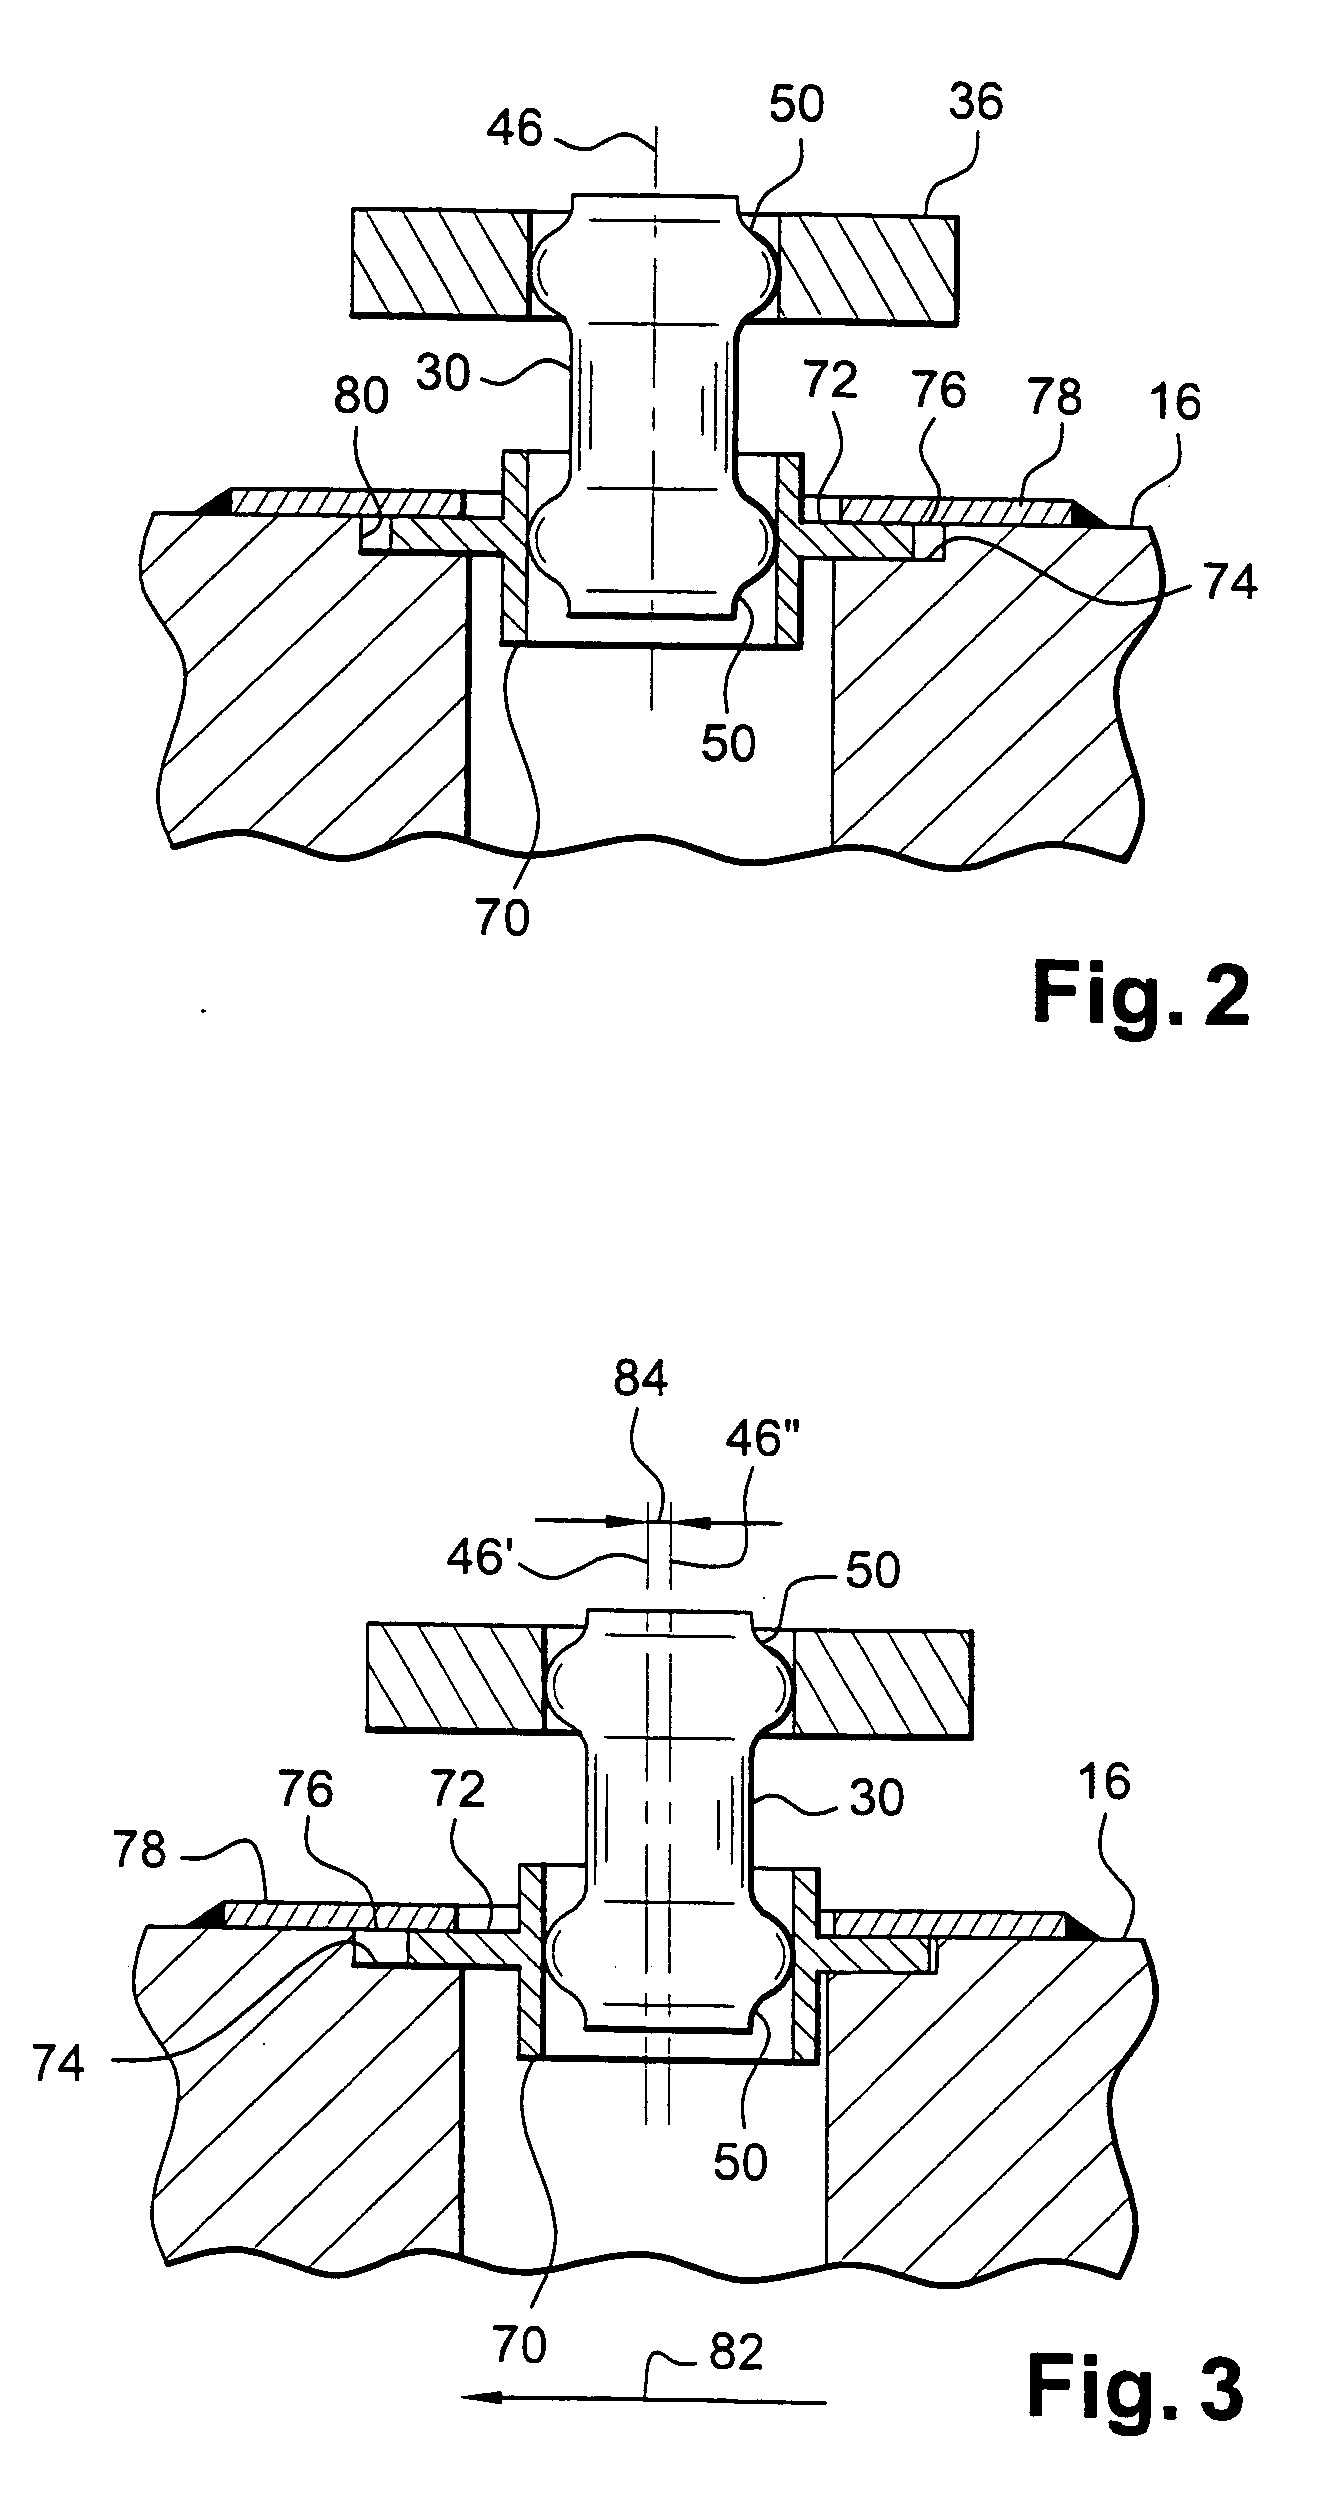 Link device between an enclosure for passing cooling air and a stator nozzle in a turbomachine